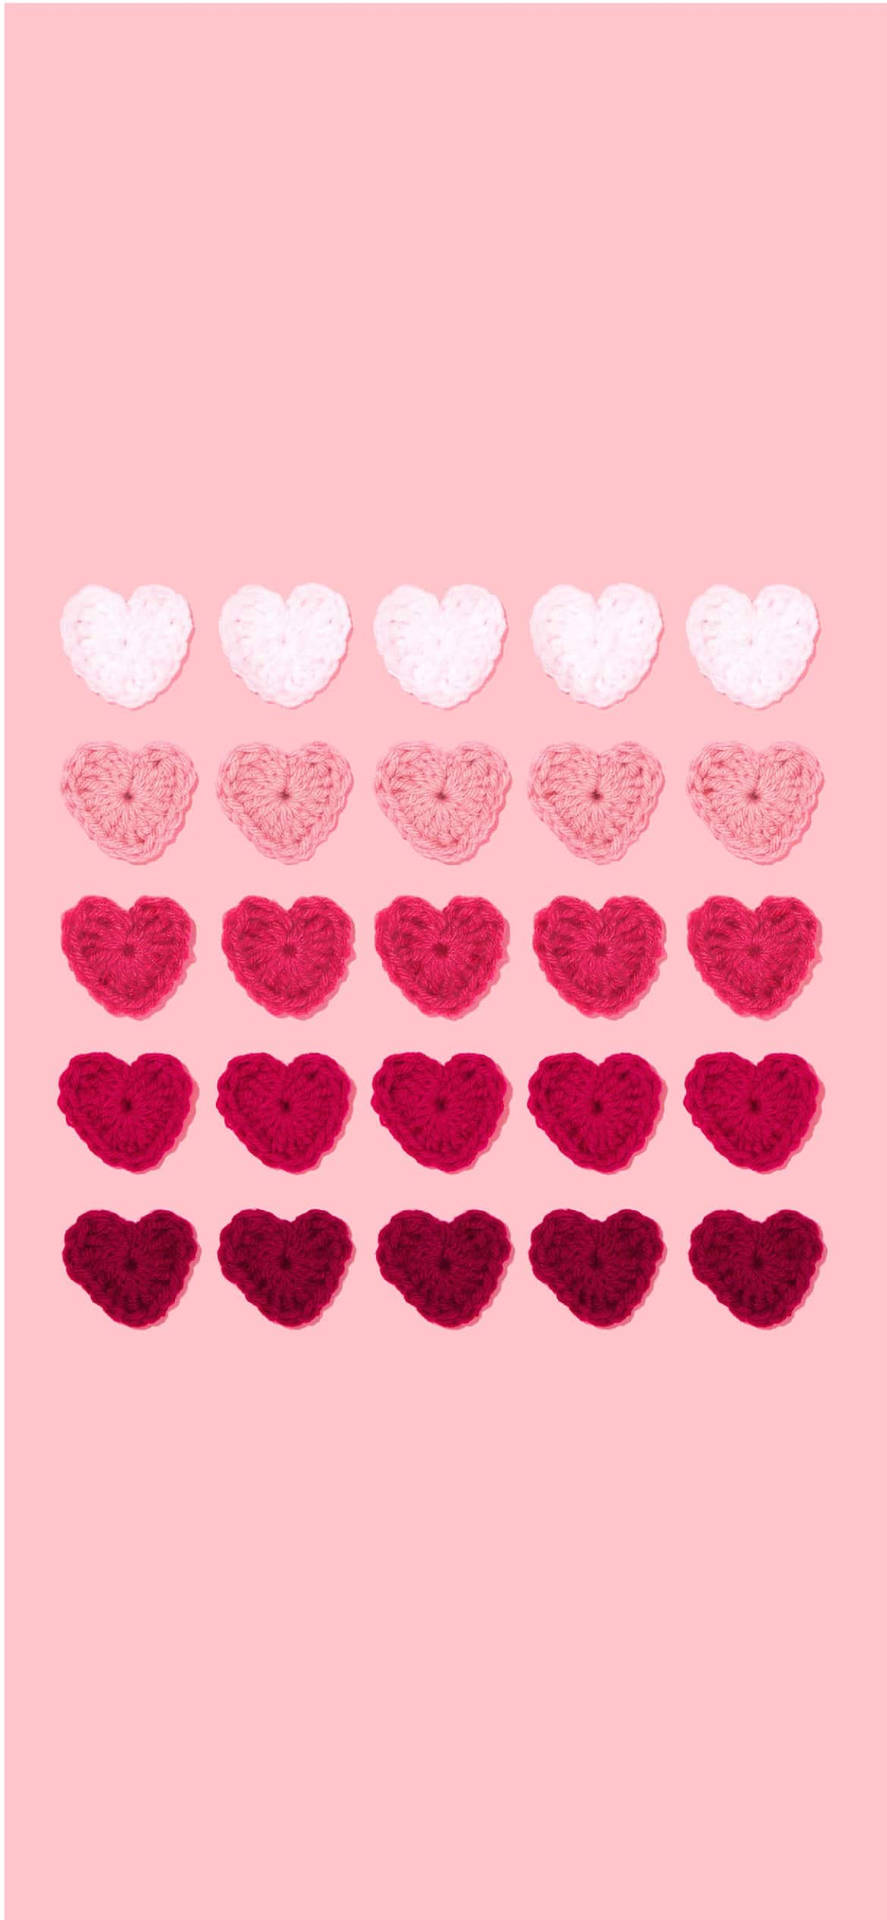 Aesthetic Pink Iphone Embroidered Hearts Wallpaper